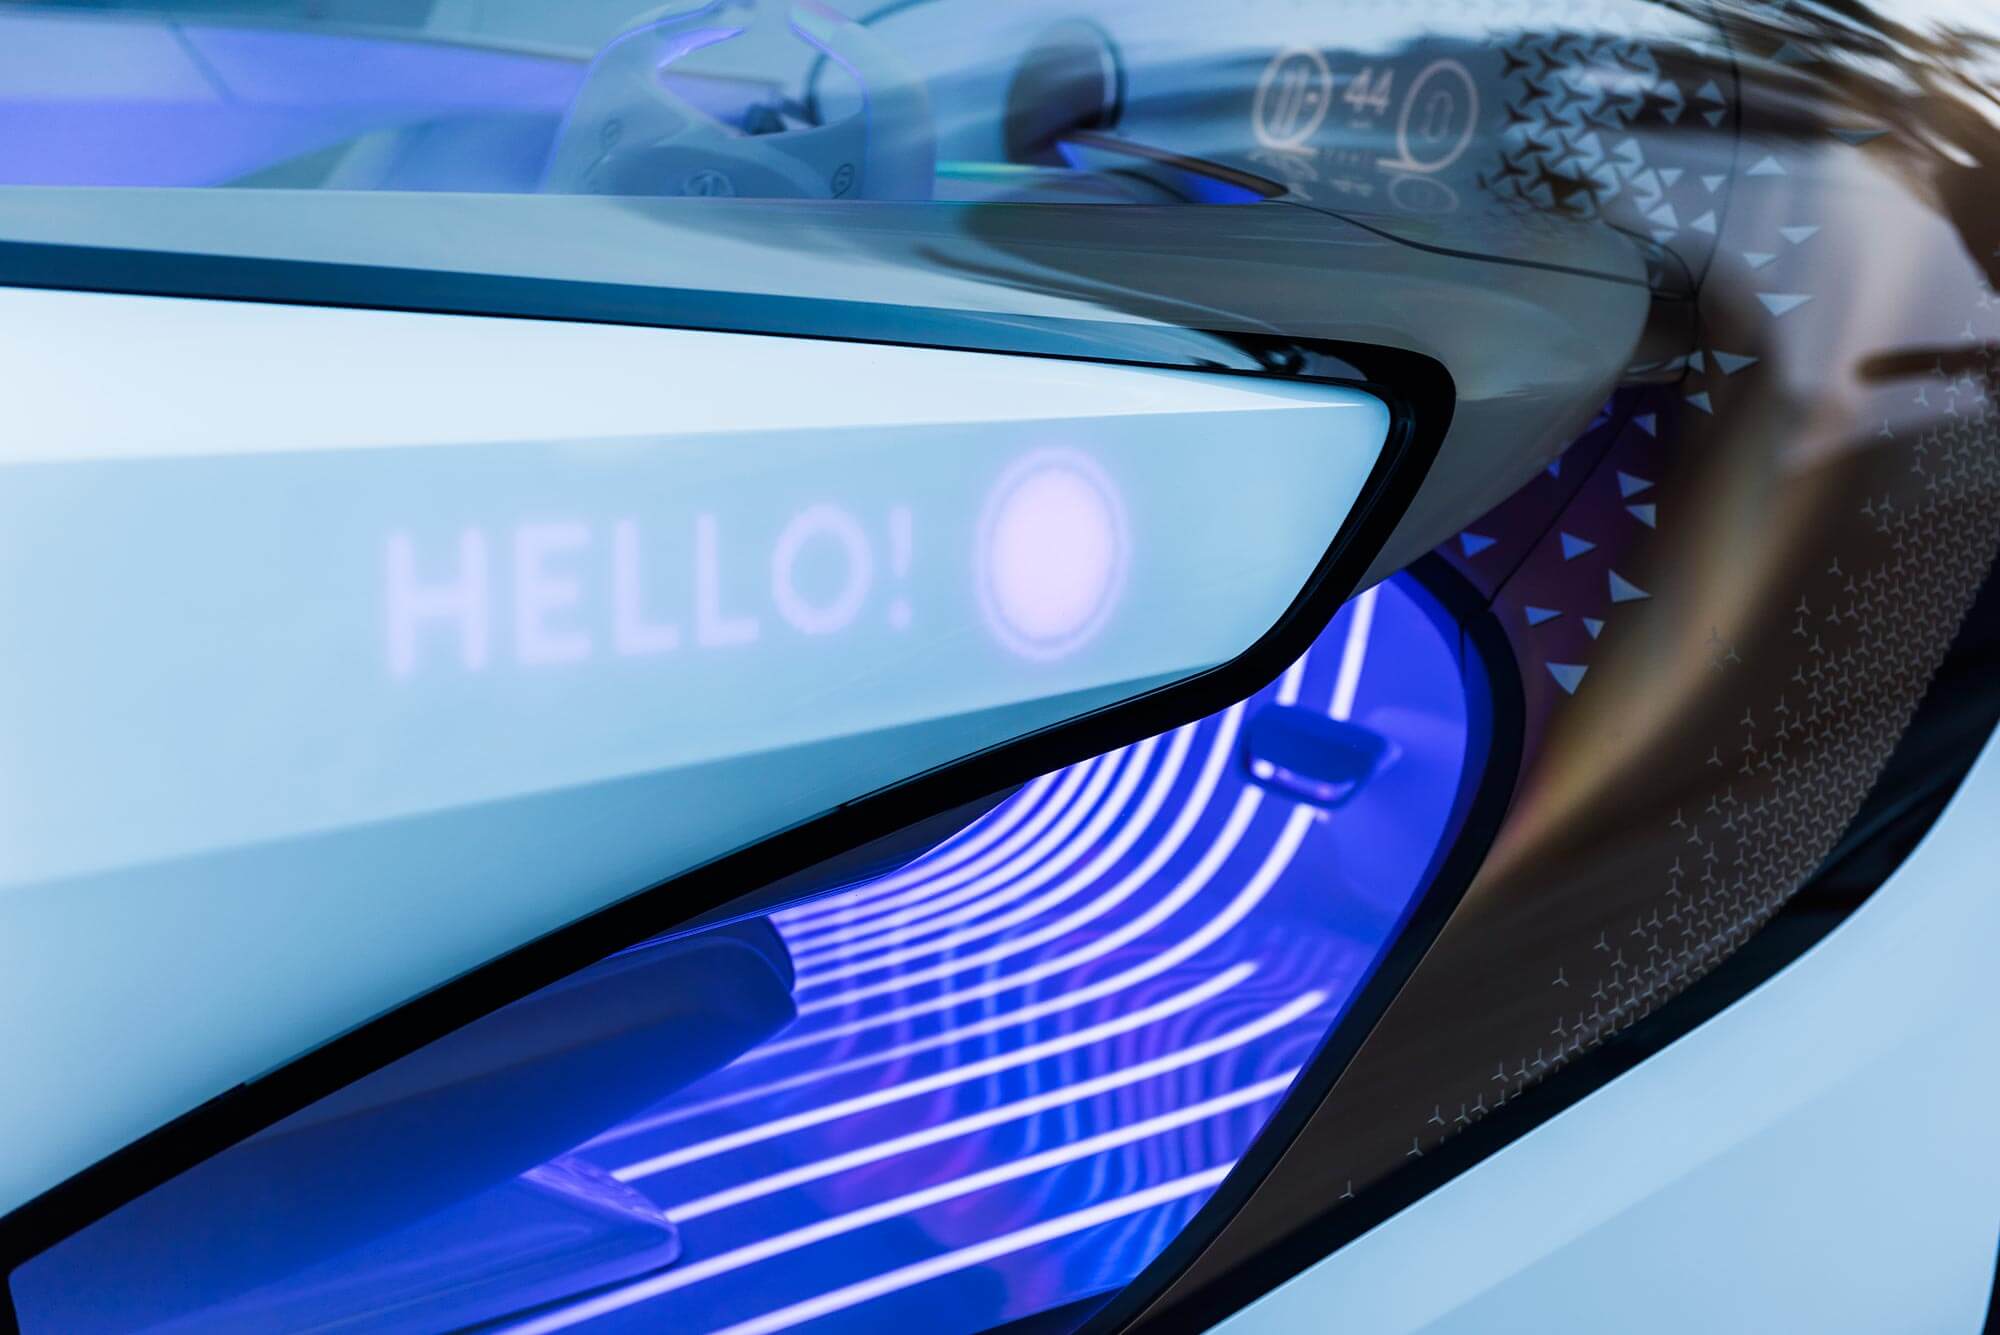 Rendering showing the messages displayed on the rear panel of Toyota's Concept-i vehicle.